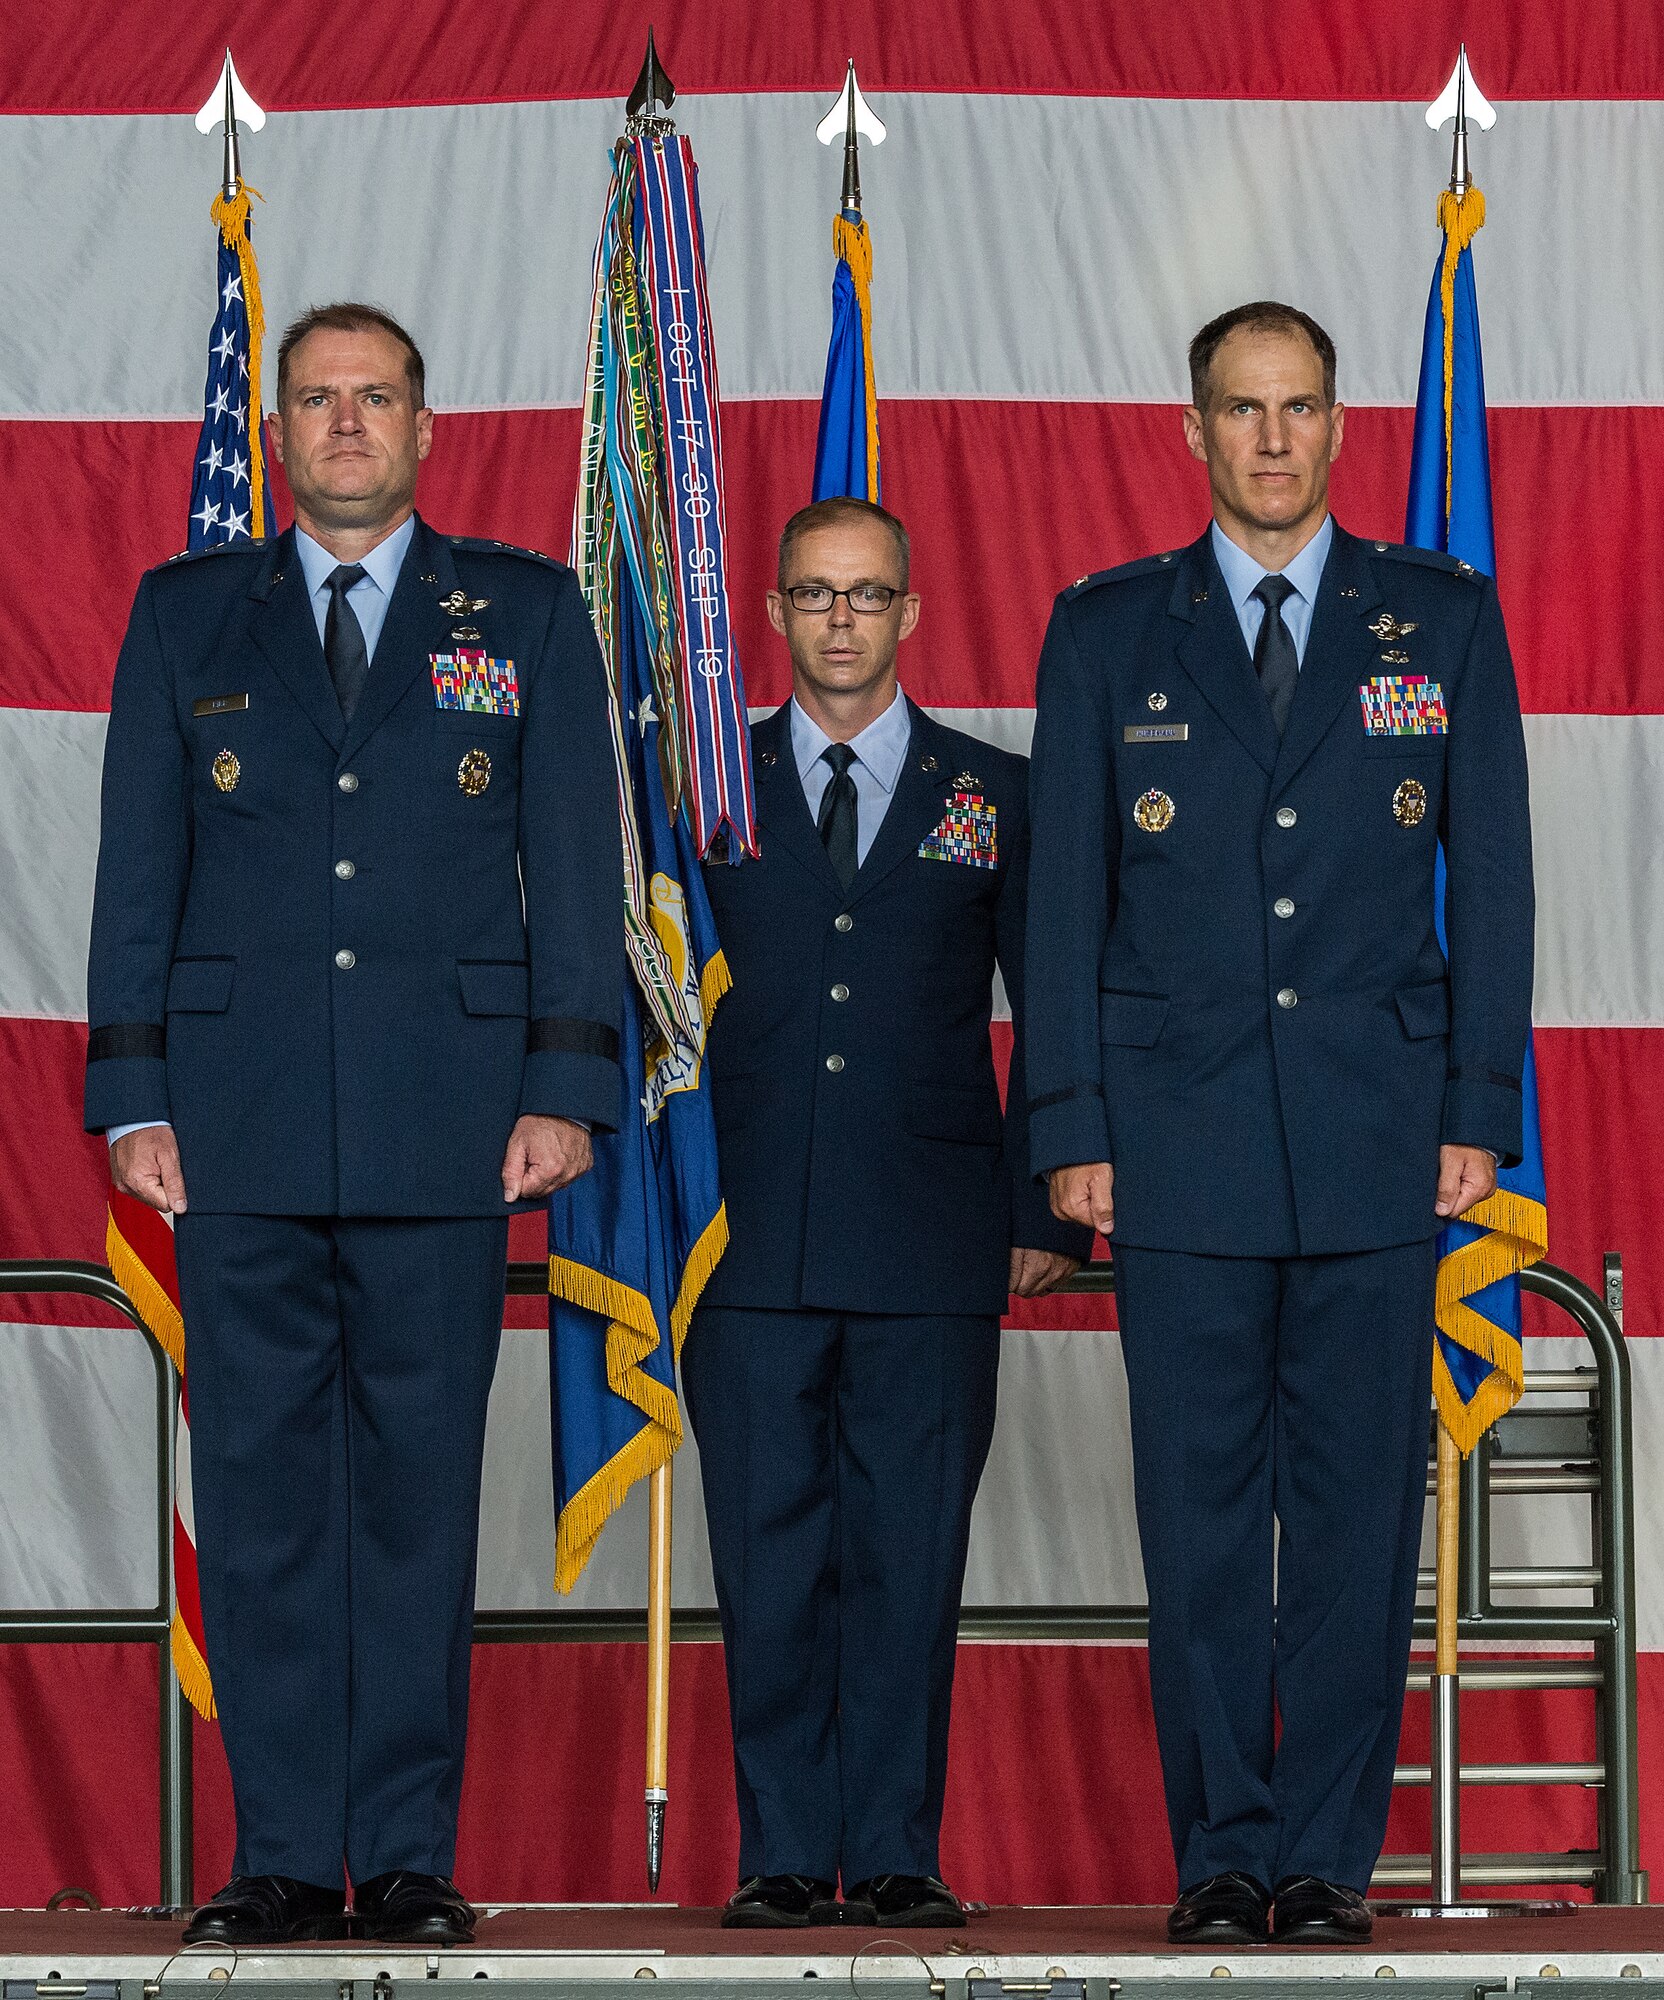 Maj. Gen. Thad Bibb, left, 18th Air Force commander; Chief Master Sgt. Timothy Bayes, 436th Airlift Wing command chief, and Col. Matthew Husemann, incoming 436th AW commander, stand at attention during the 436th AW Assumption of Command ceremony on Dover Air Force Base, Delaware, June 4, 2021. Husemann assumed command in a ceremony attended by friends, family, Team Dover members, local civic leaders and distinguished visitors. (U.S. Air Force photo by Roland Balik)